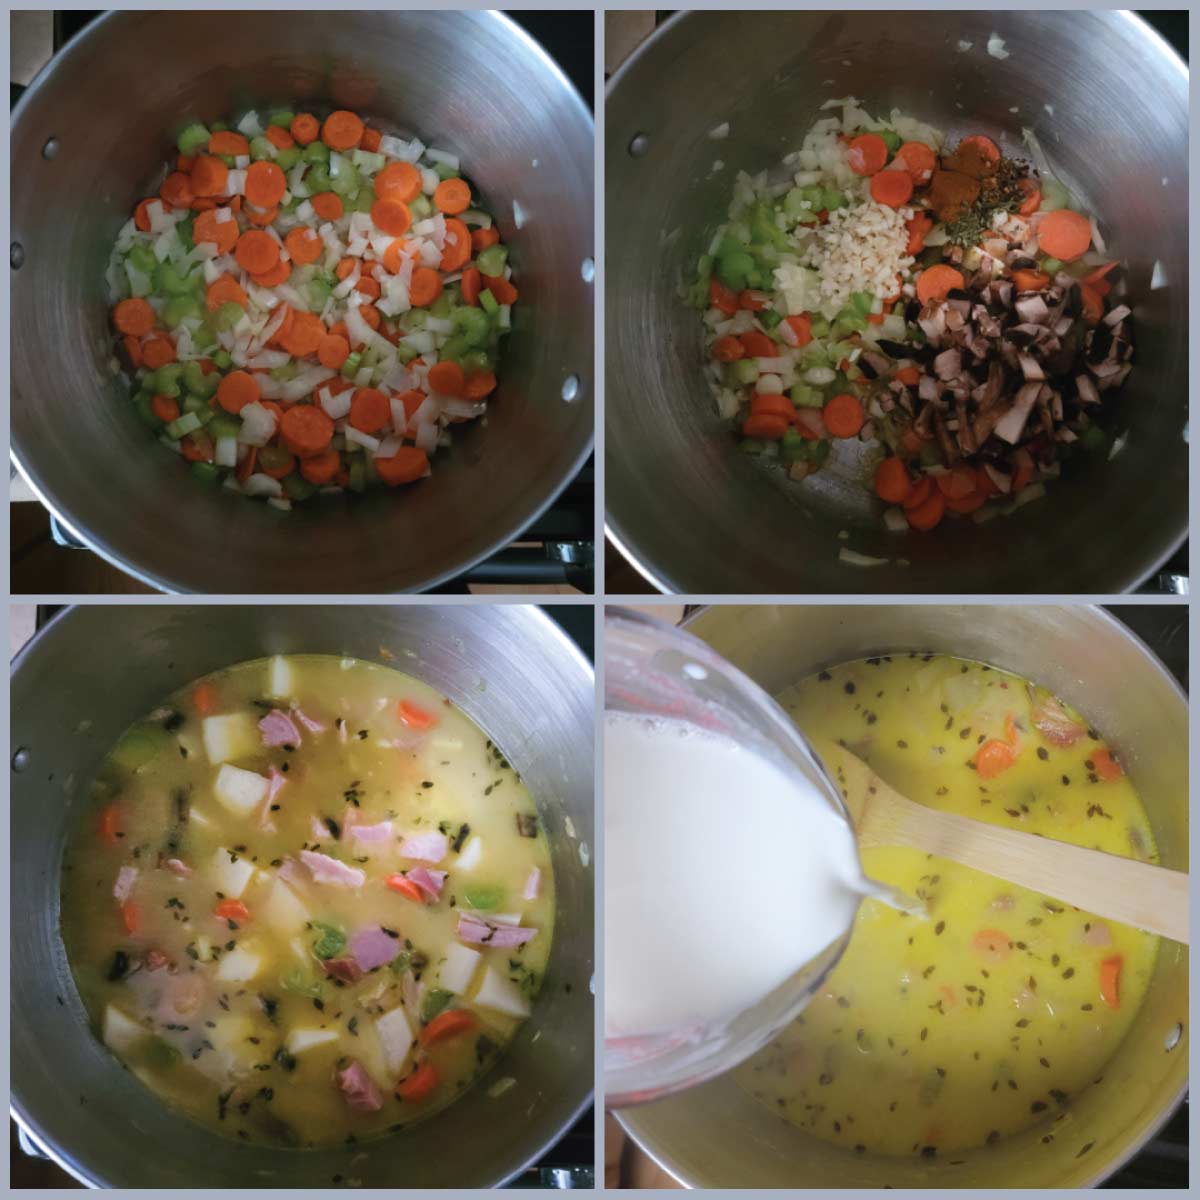 Step by step pictures. Big pot with carrots, celery, butter and onion cooking. Then the mushrooms, garlic and seasonings are added. Next is the potatoes, broth and half of the milk. Last is the remaining milk mixed with the flour being poured into the soup.